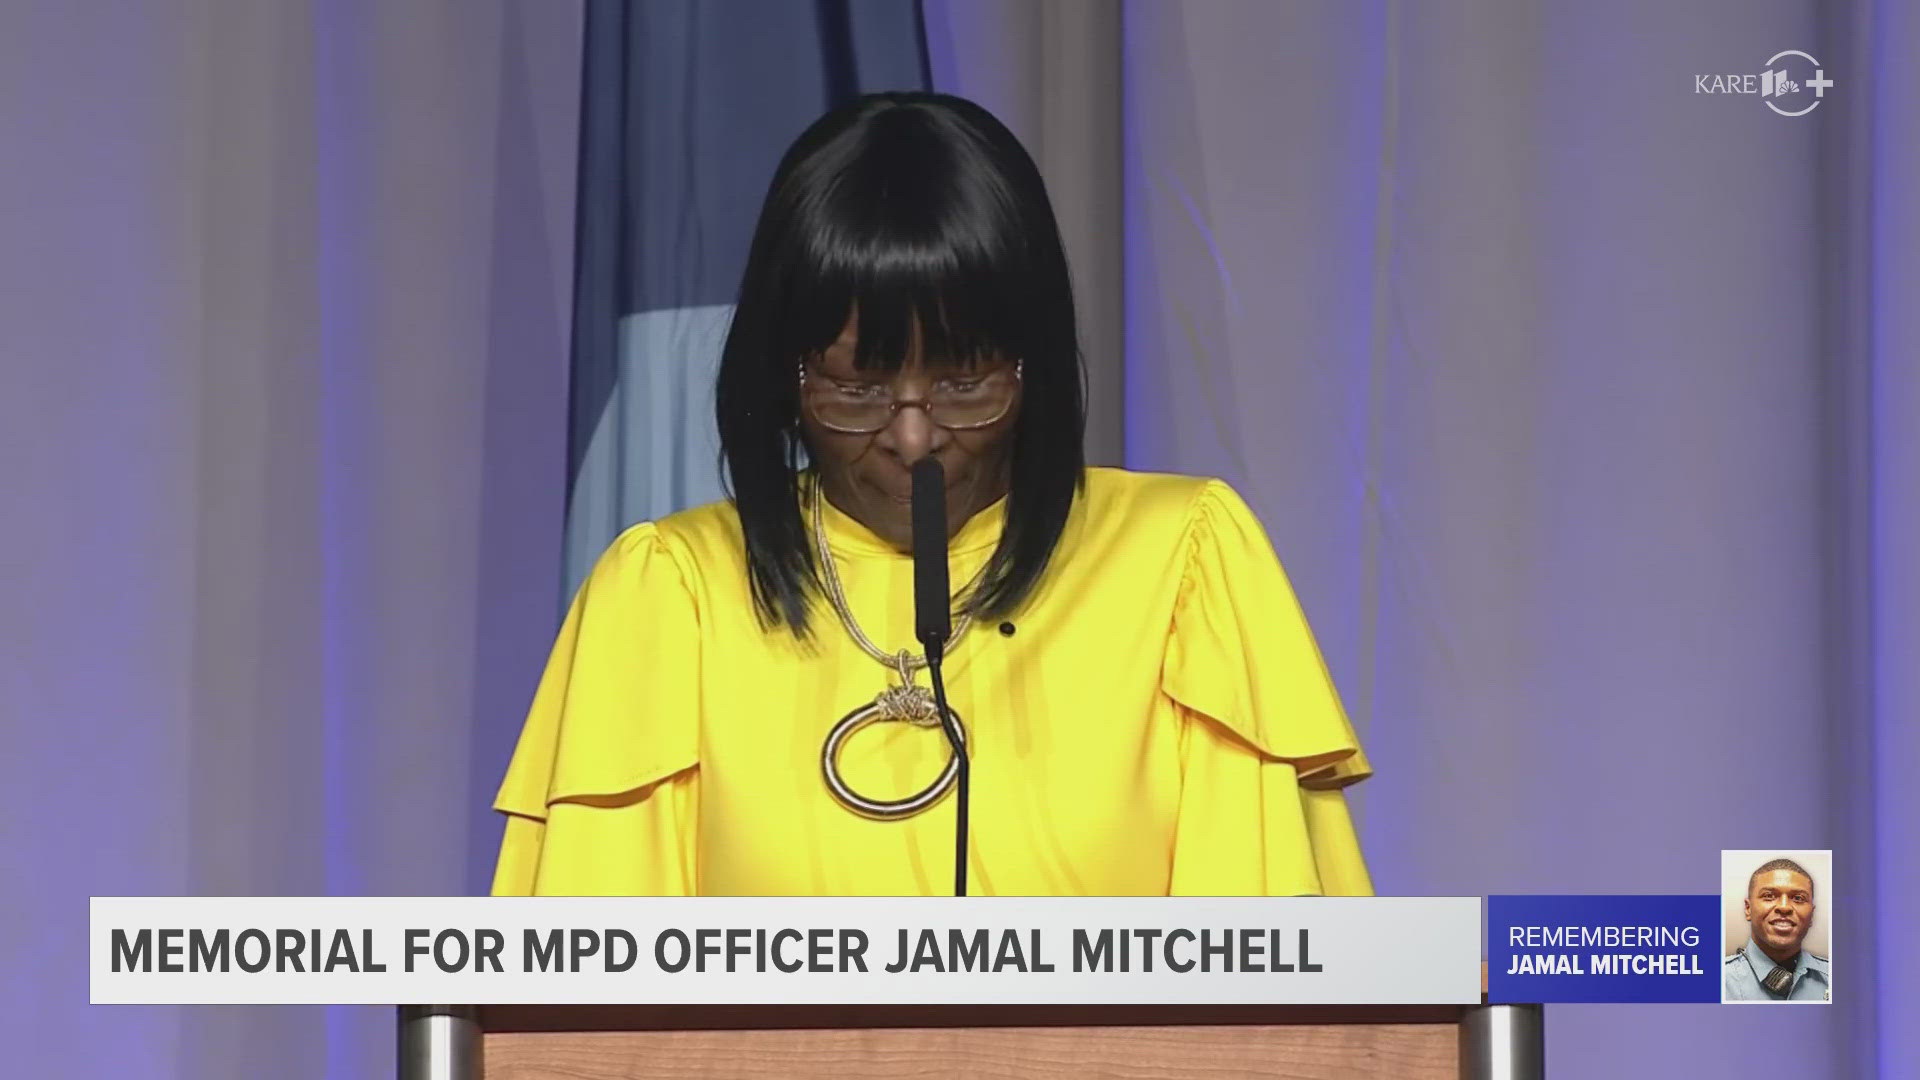 Mitchell's aunt Denise Raper read Psalm 23 and offered words of thanks on behalf of the family.